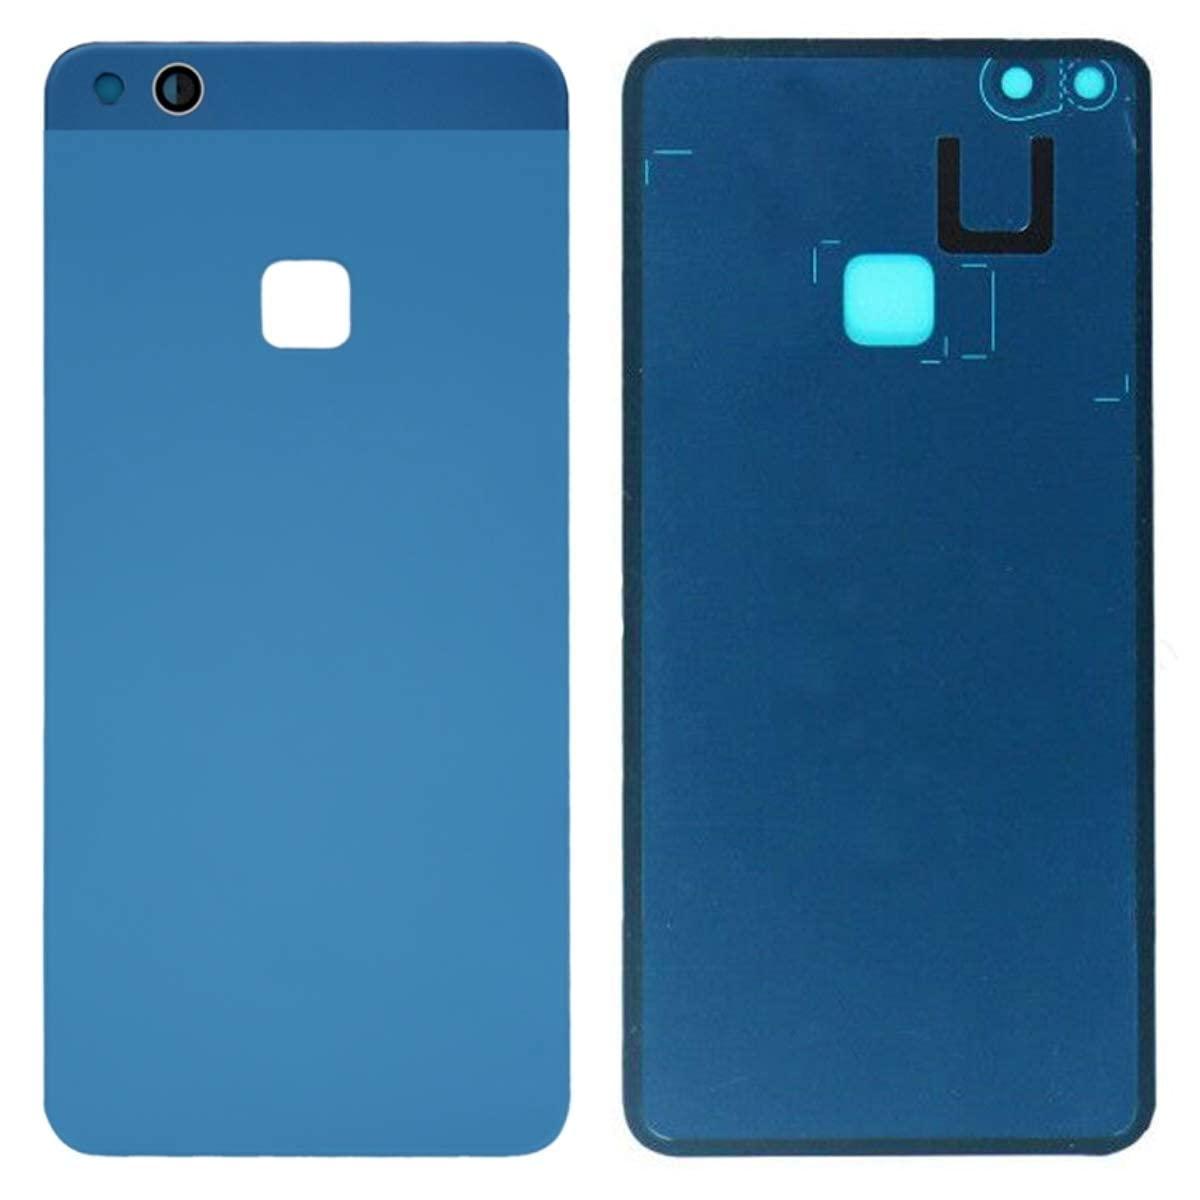 Back Glass Panel for Huawei P10 Lite  Blue